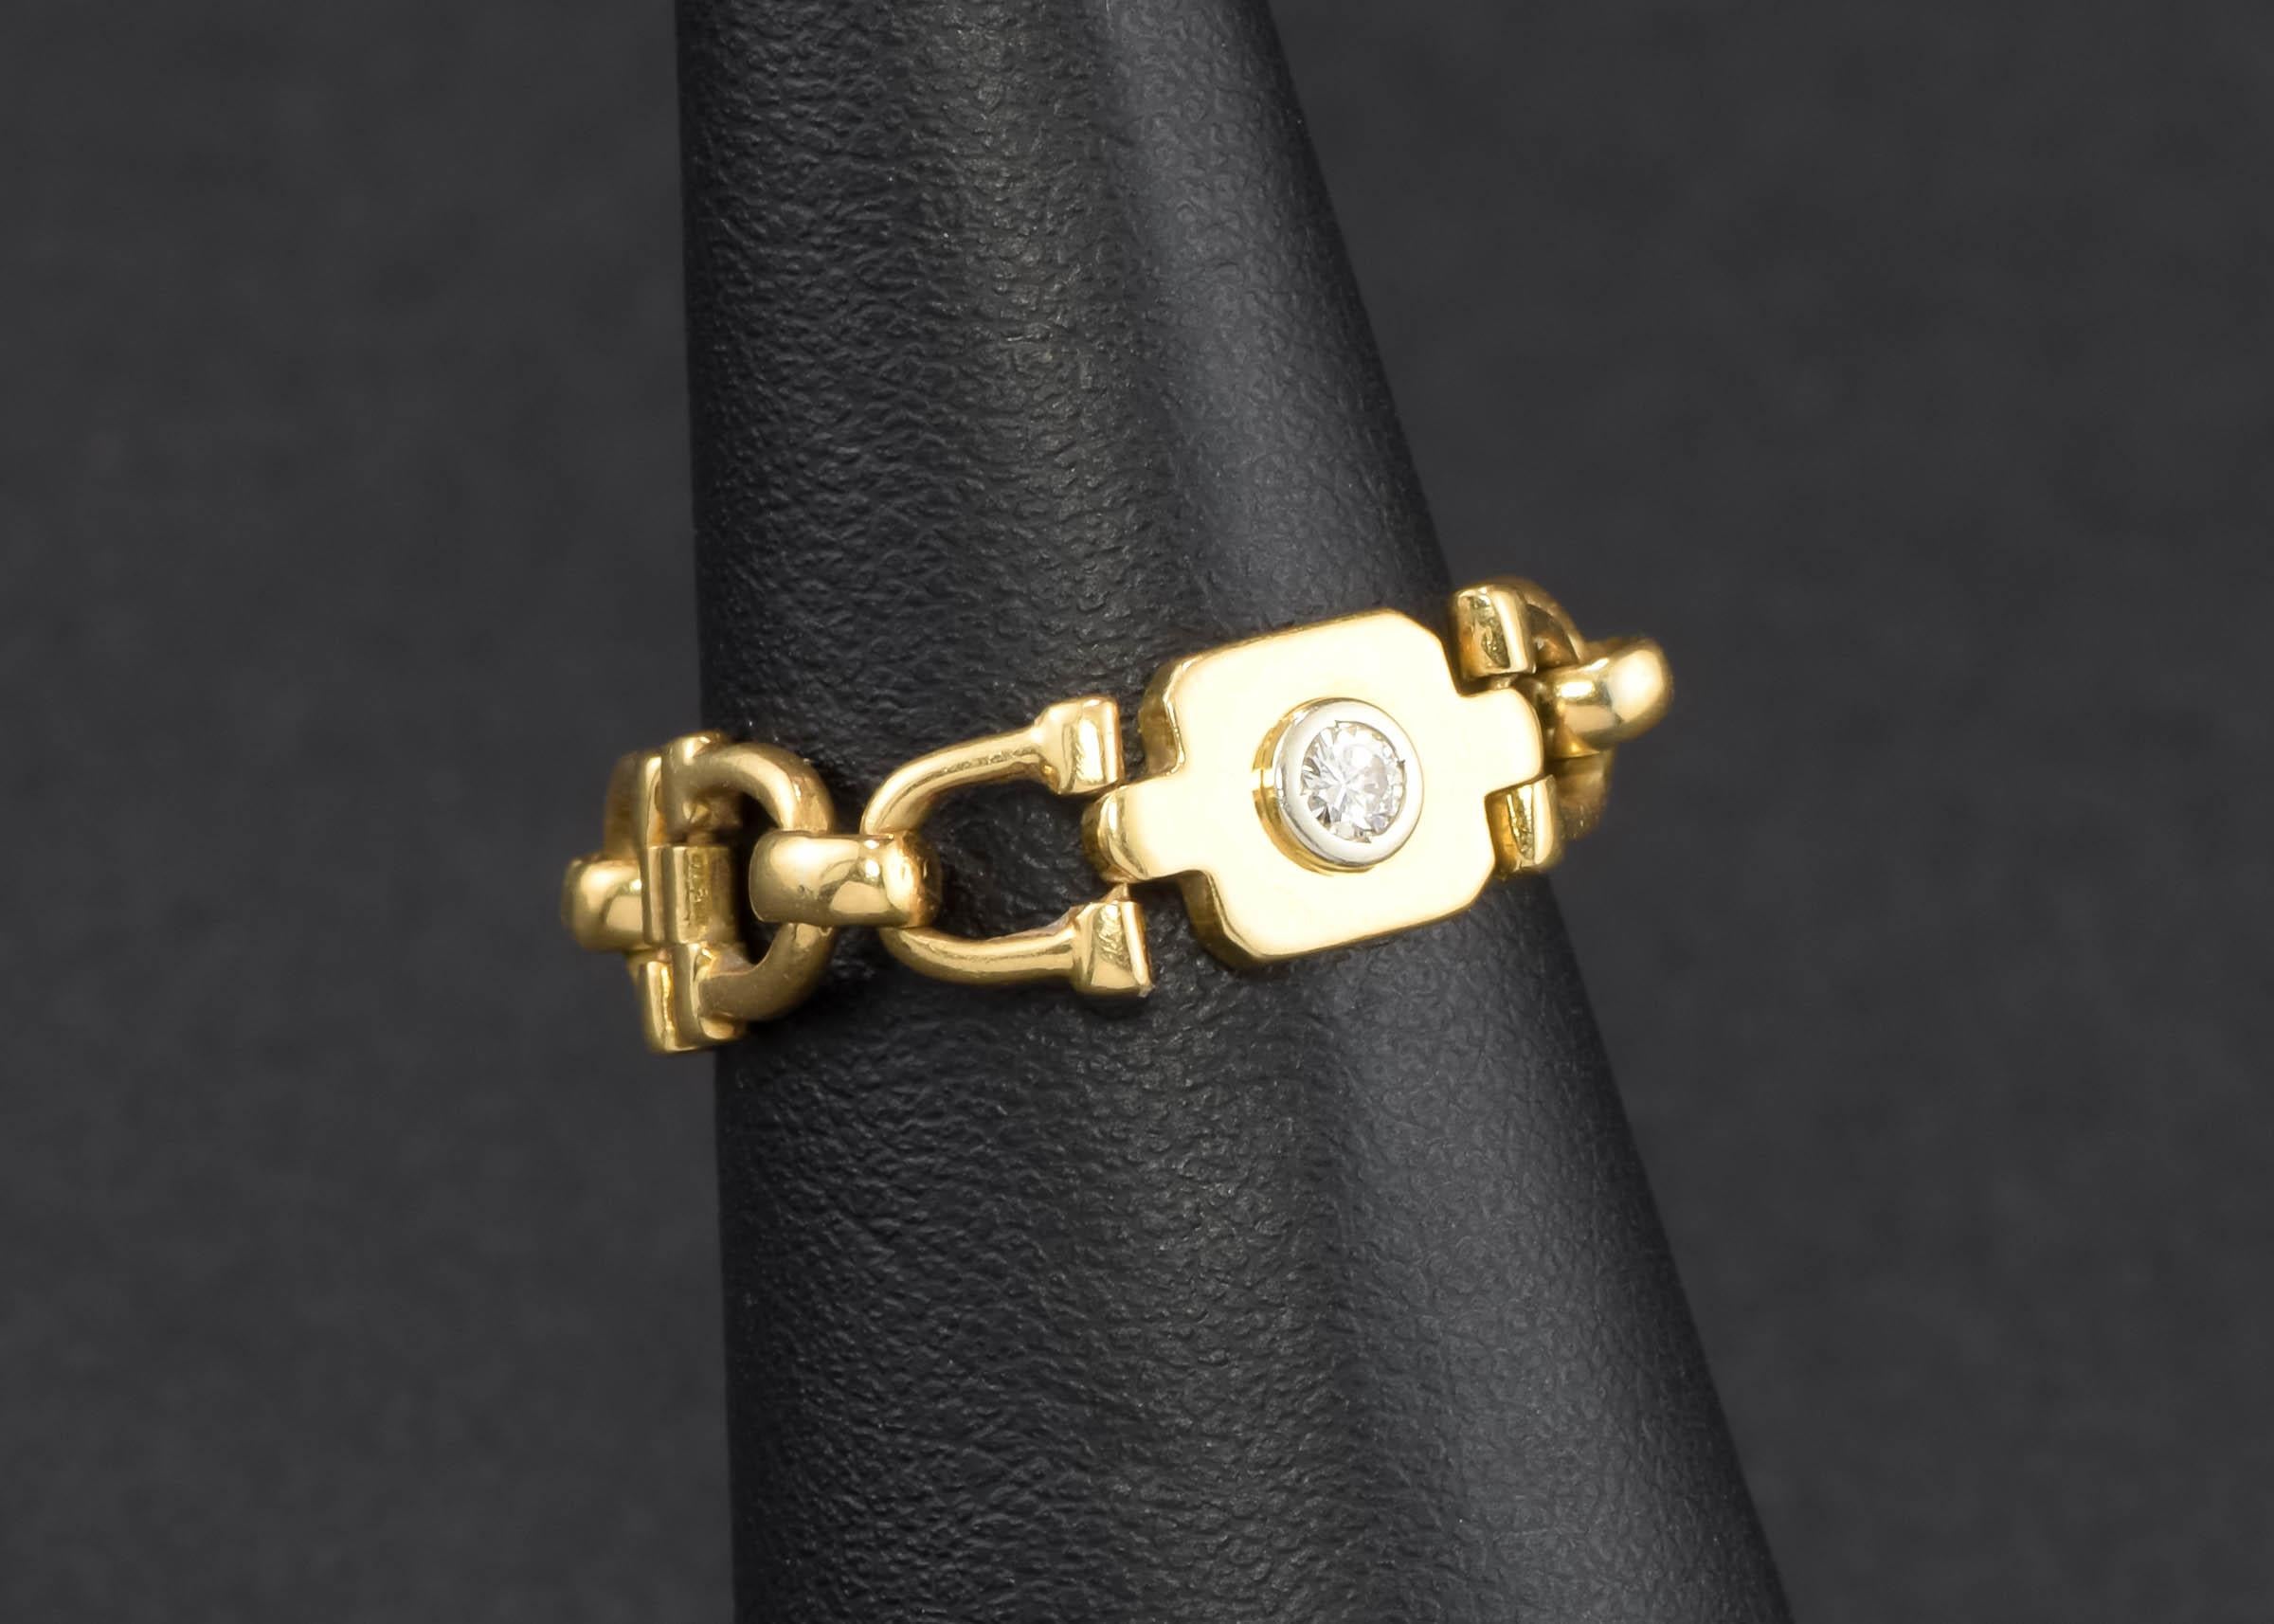 For my fellow horse lovers, is this wonderful vintage Cartier Equestrian Horse Bit Link Ring dating to the 1980's....

Crafted of 18K gold, the ring features a really neat articulated/hinged link design of gold horse bits, with a central plaque set